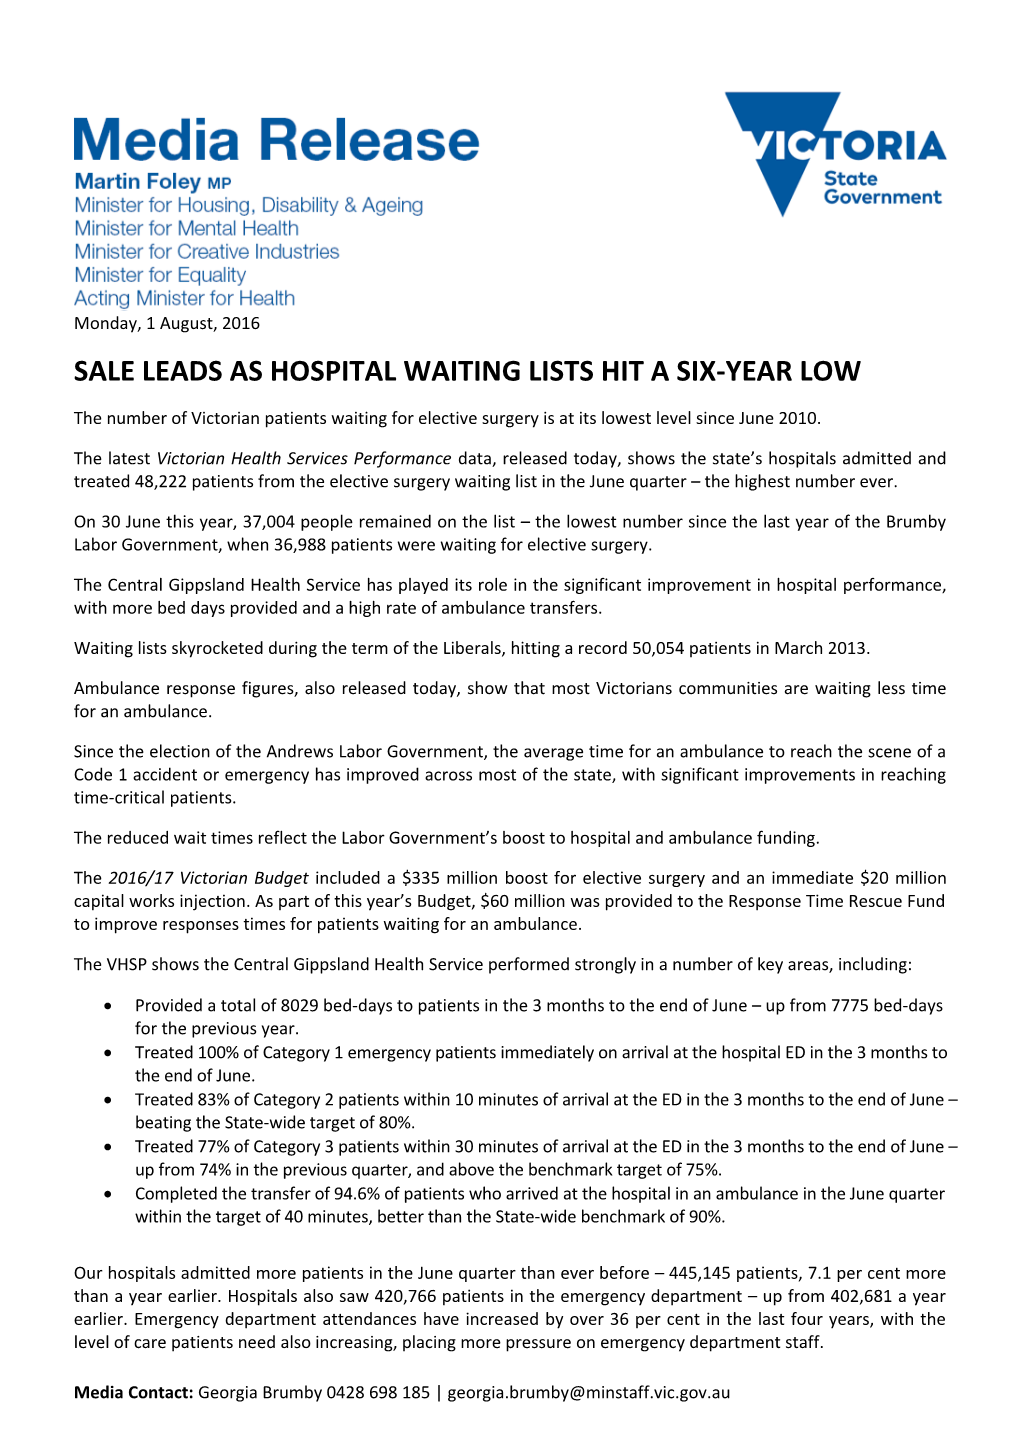 Sale Leads As Hospital Waiting Lists Hit a Six-Year Low